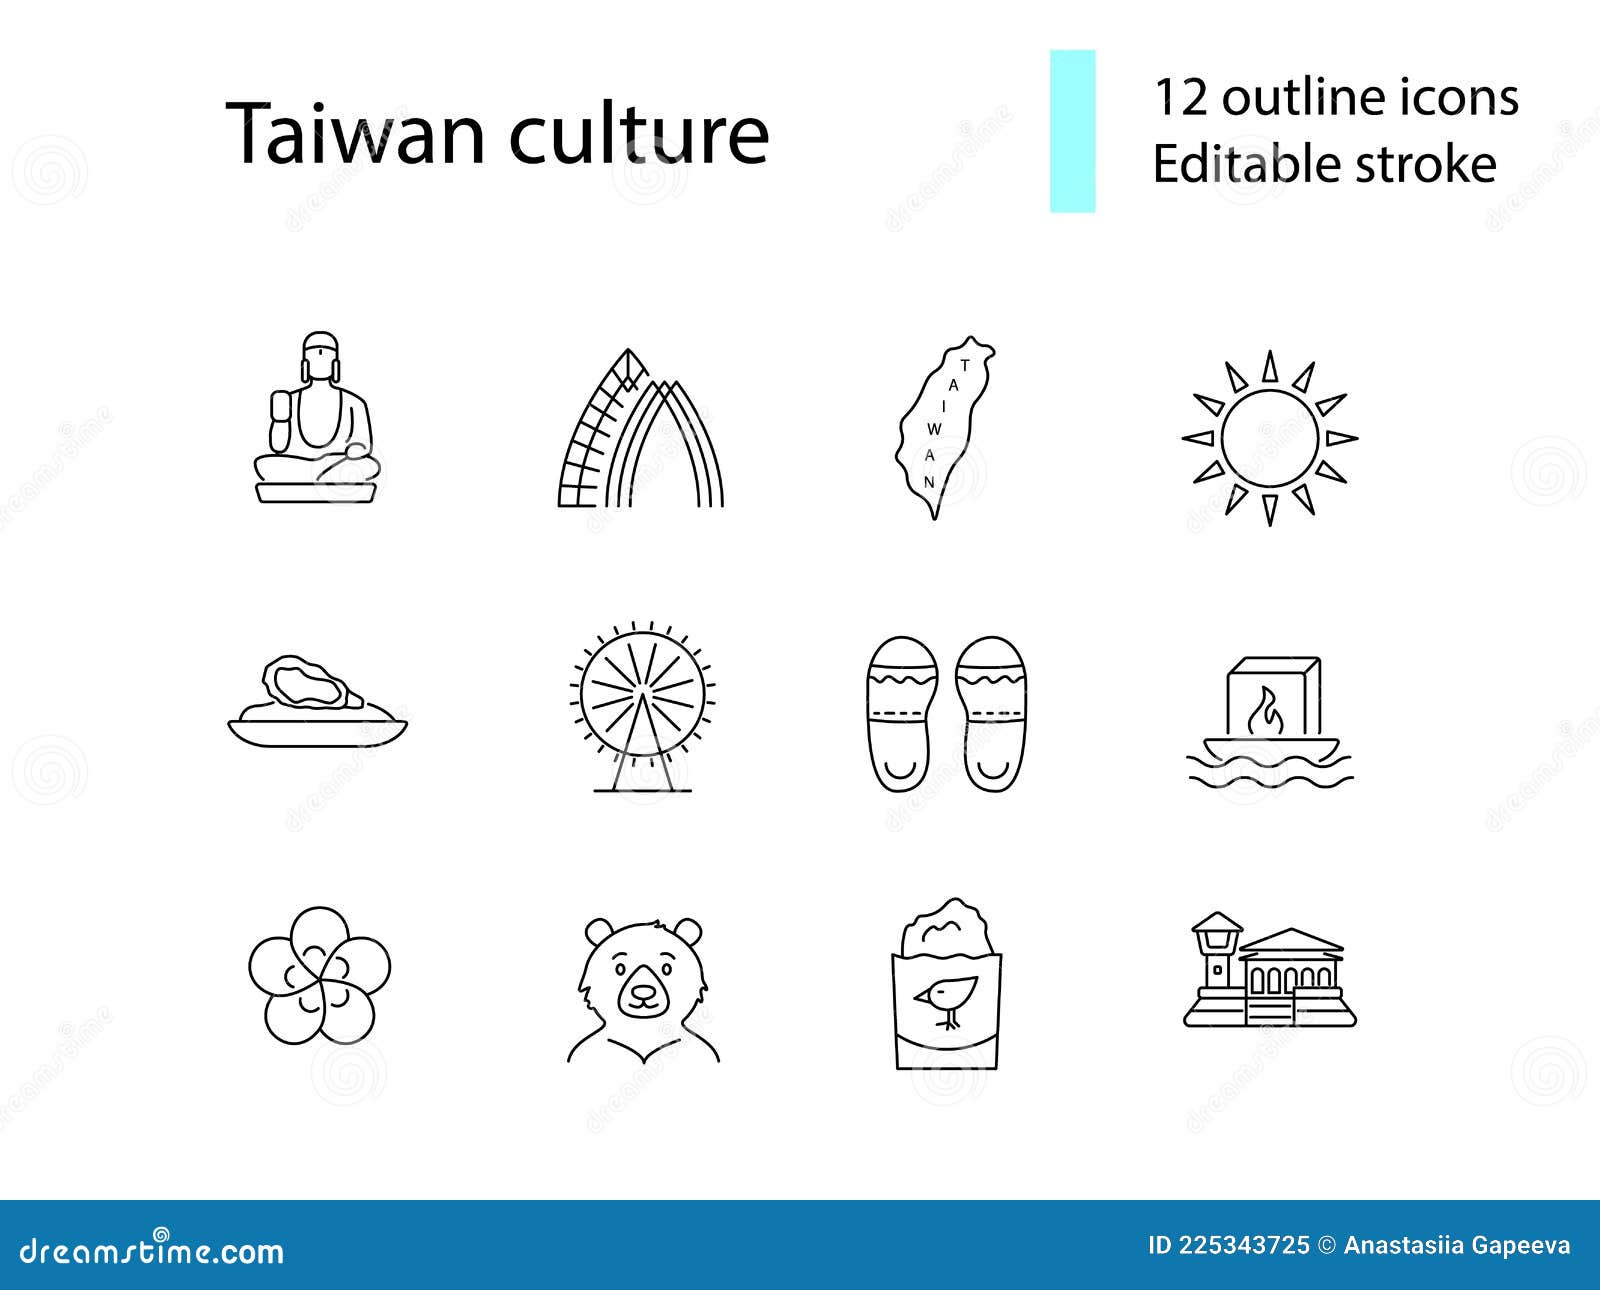 taiwan culture outline icons set. taiwanes attractions. buddha, formosan. editable stroke.   